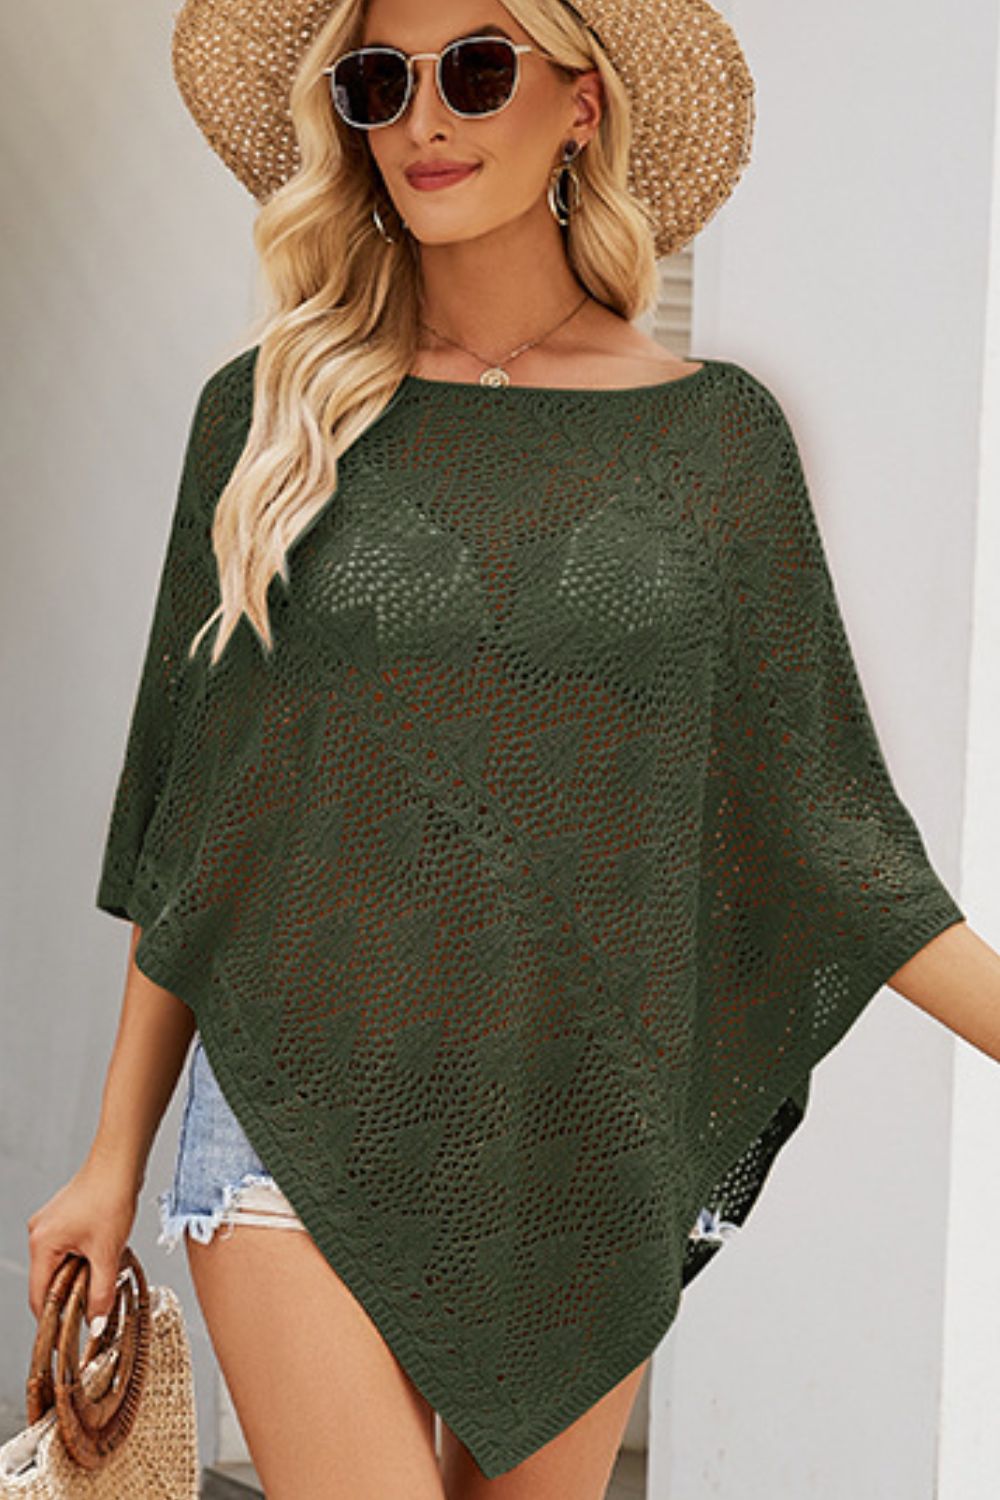 Sunset Vacation  Openwork Boat Neck Shawl Cover Up  Sunset and Swim   